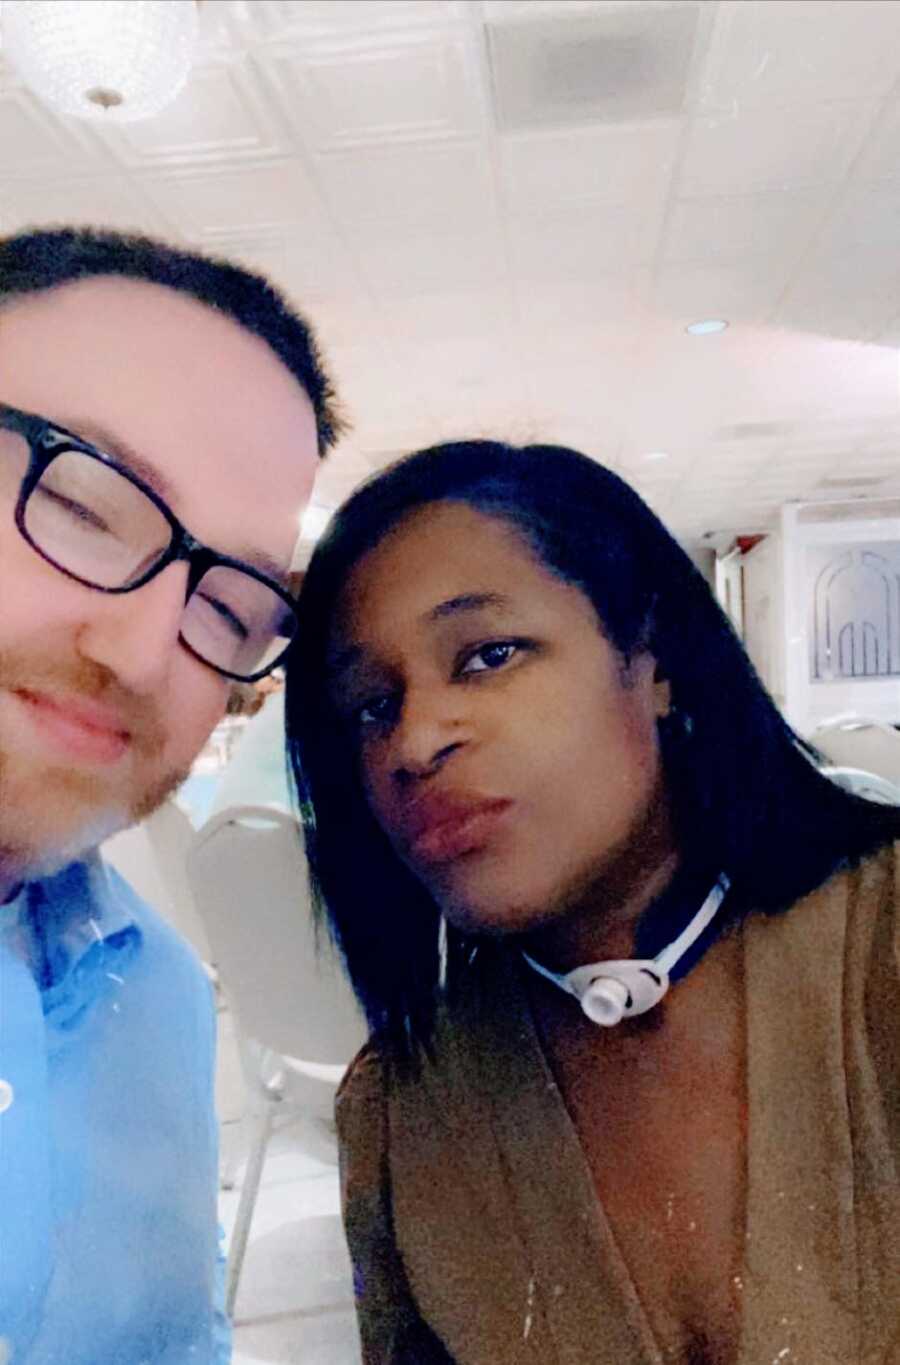 Couple take a selfie together while out to dinner